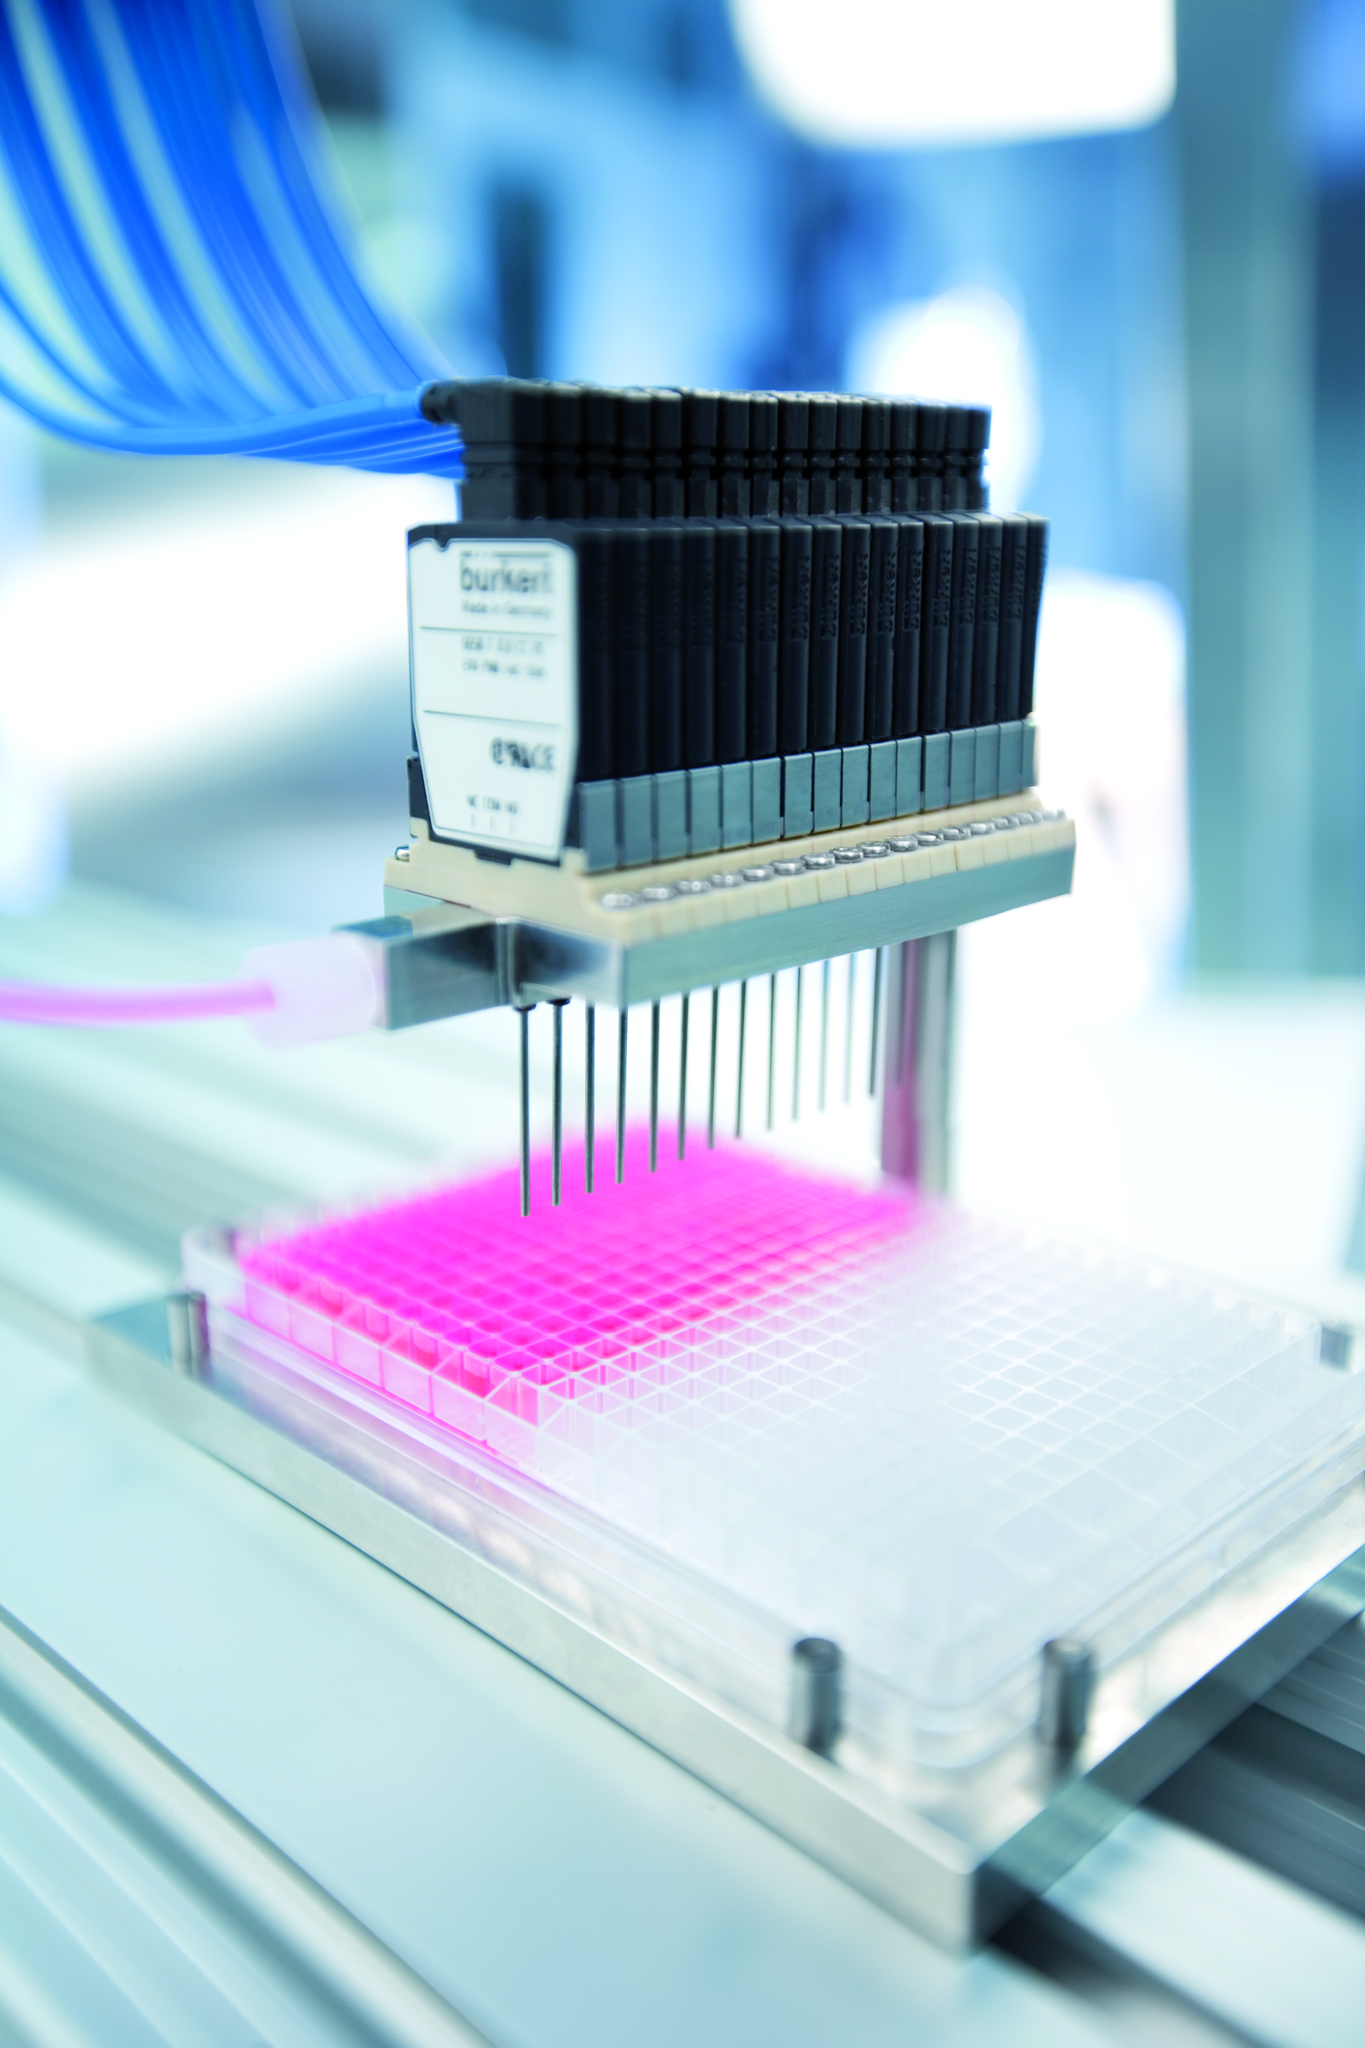 Accurate microfluidic dosing is essential for life science and genomics research, as well as the administration of medical care.